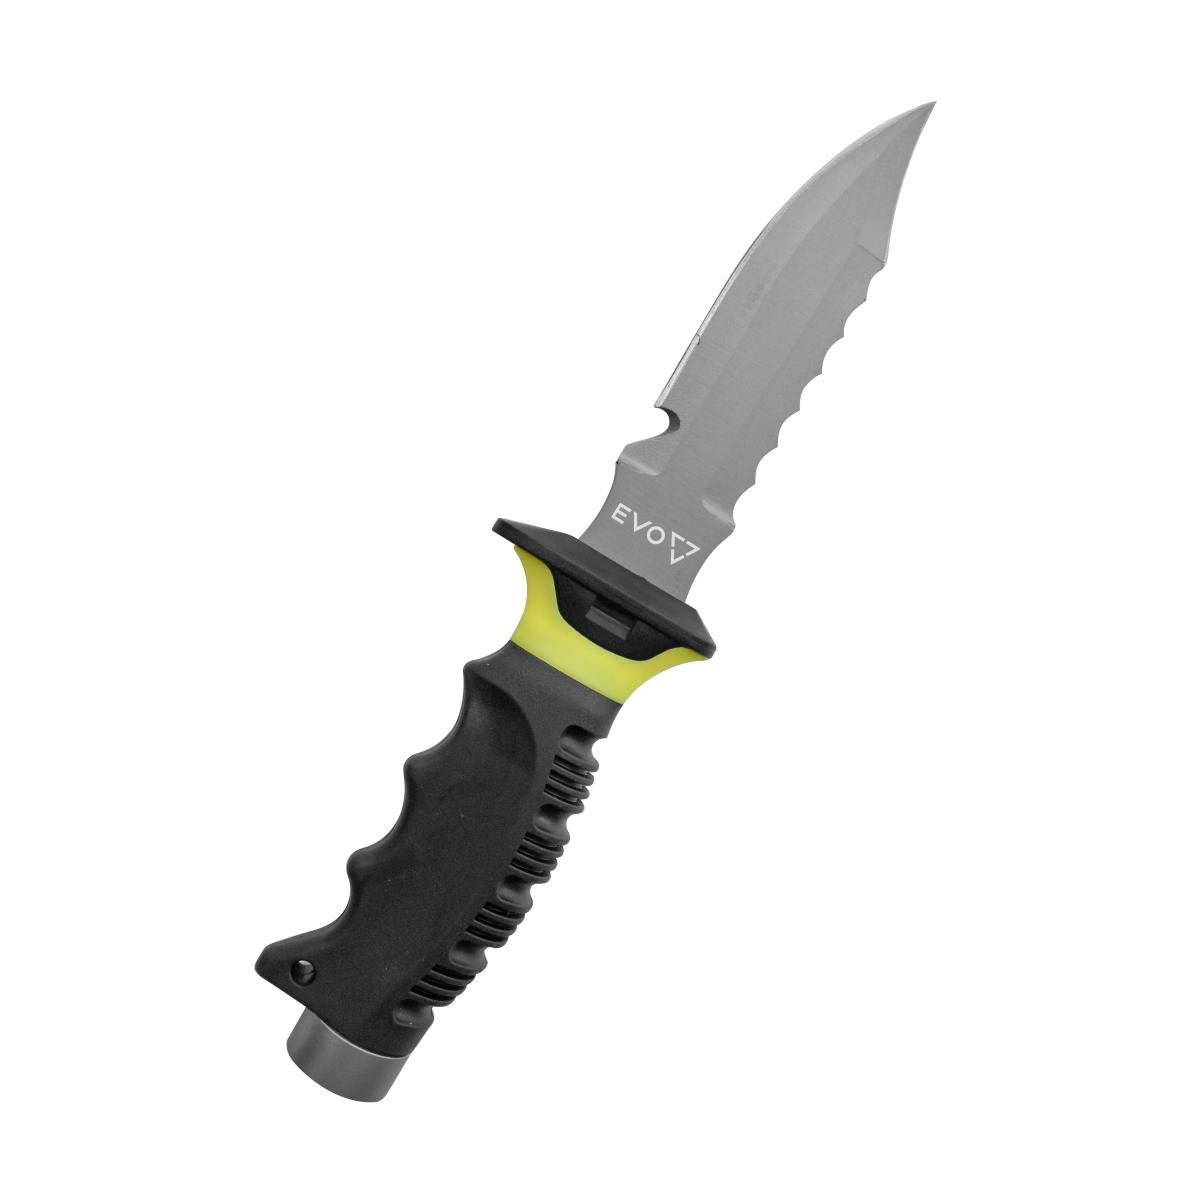 EVO Titanium Dive Knife shown with yellow option - Pointed Tip